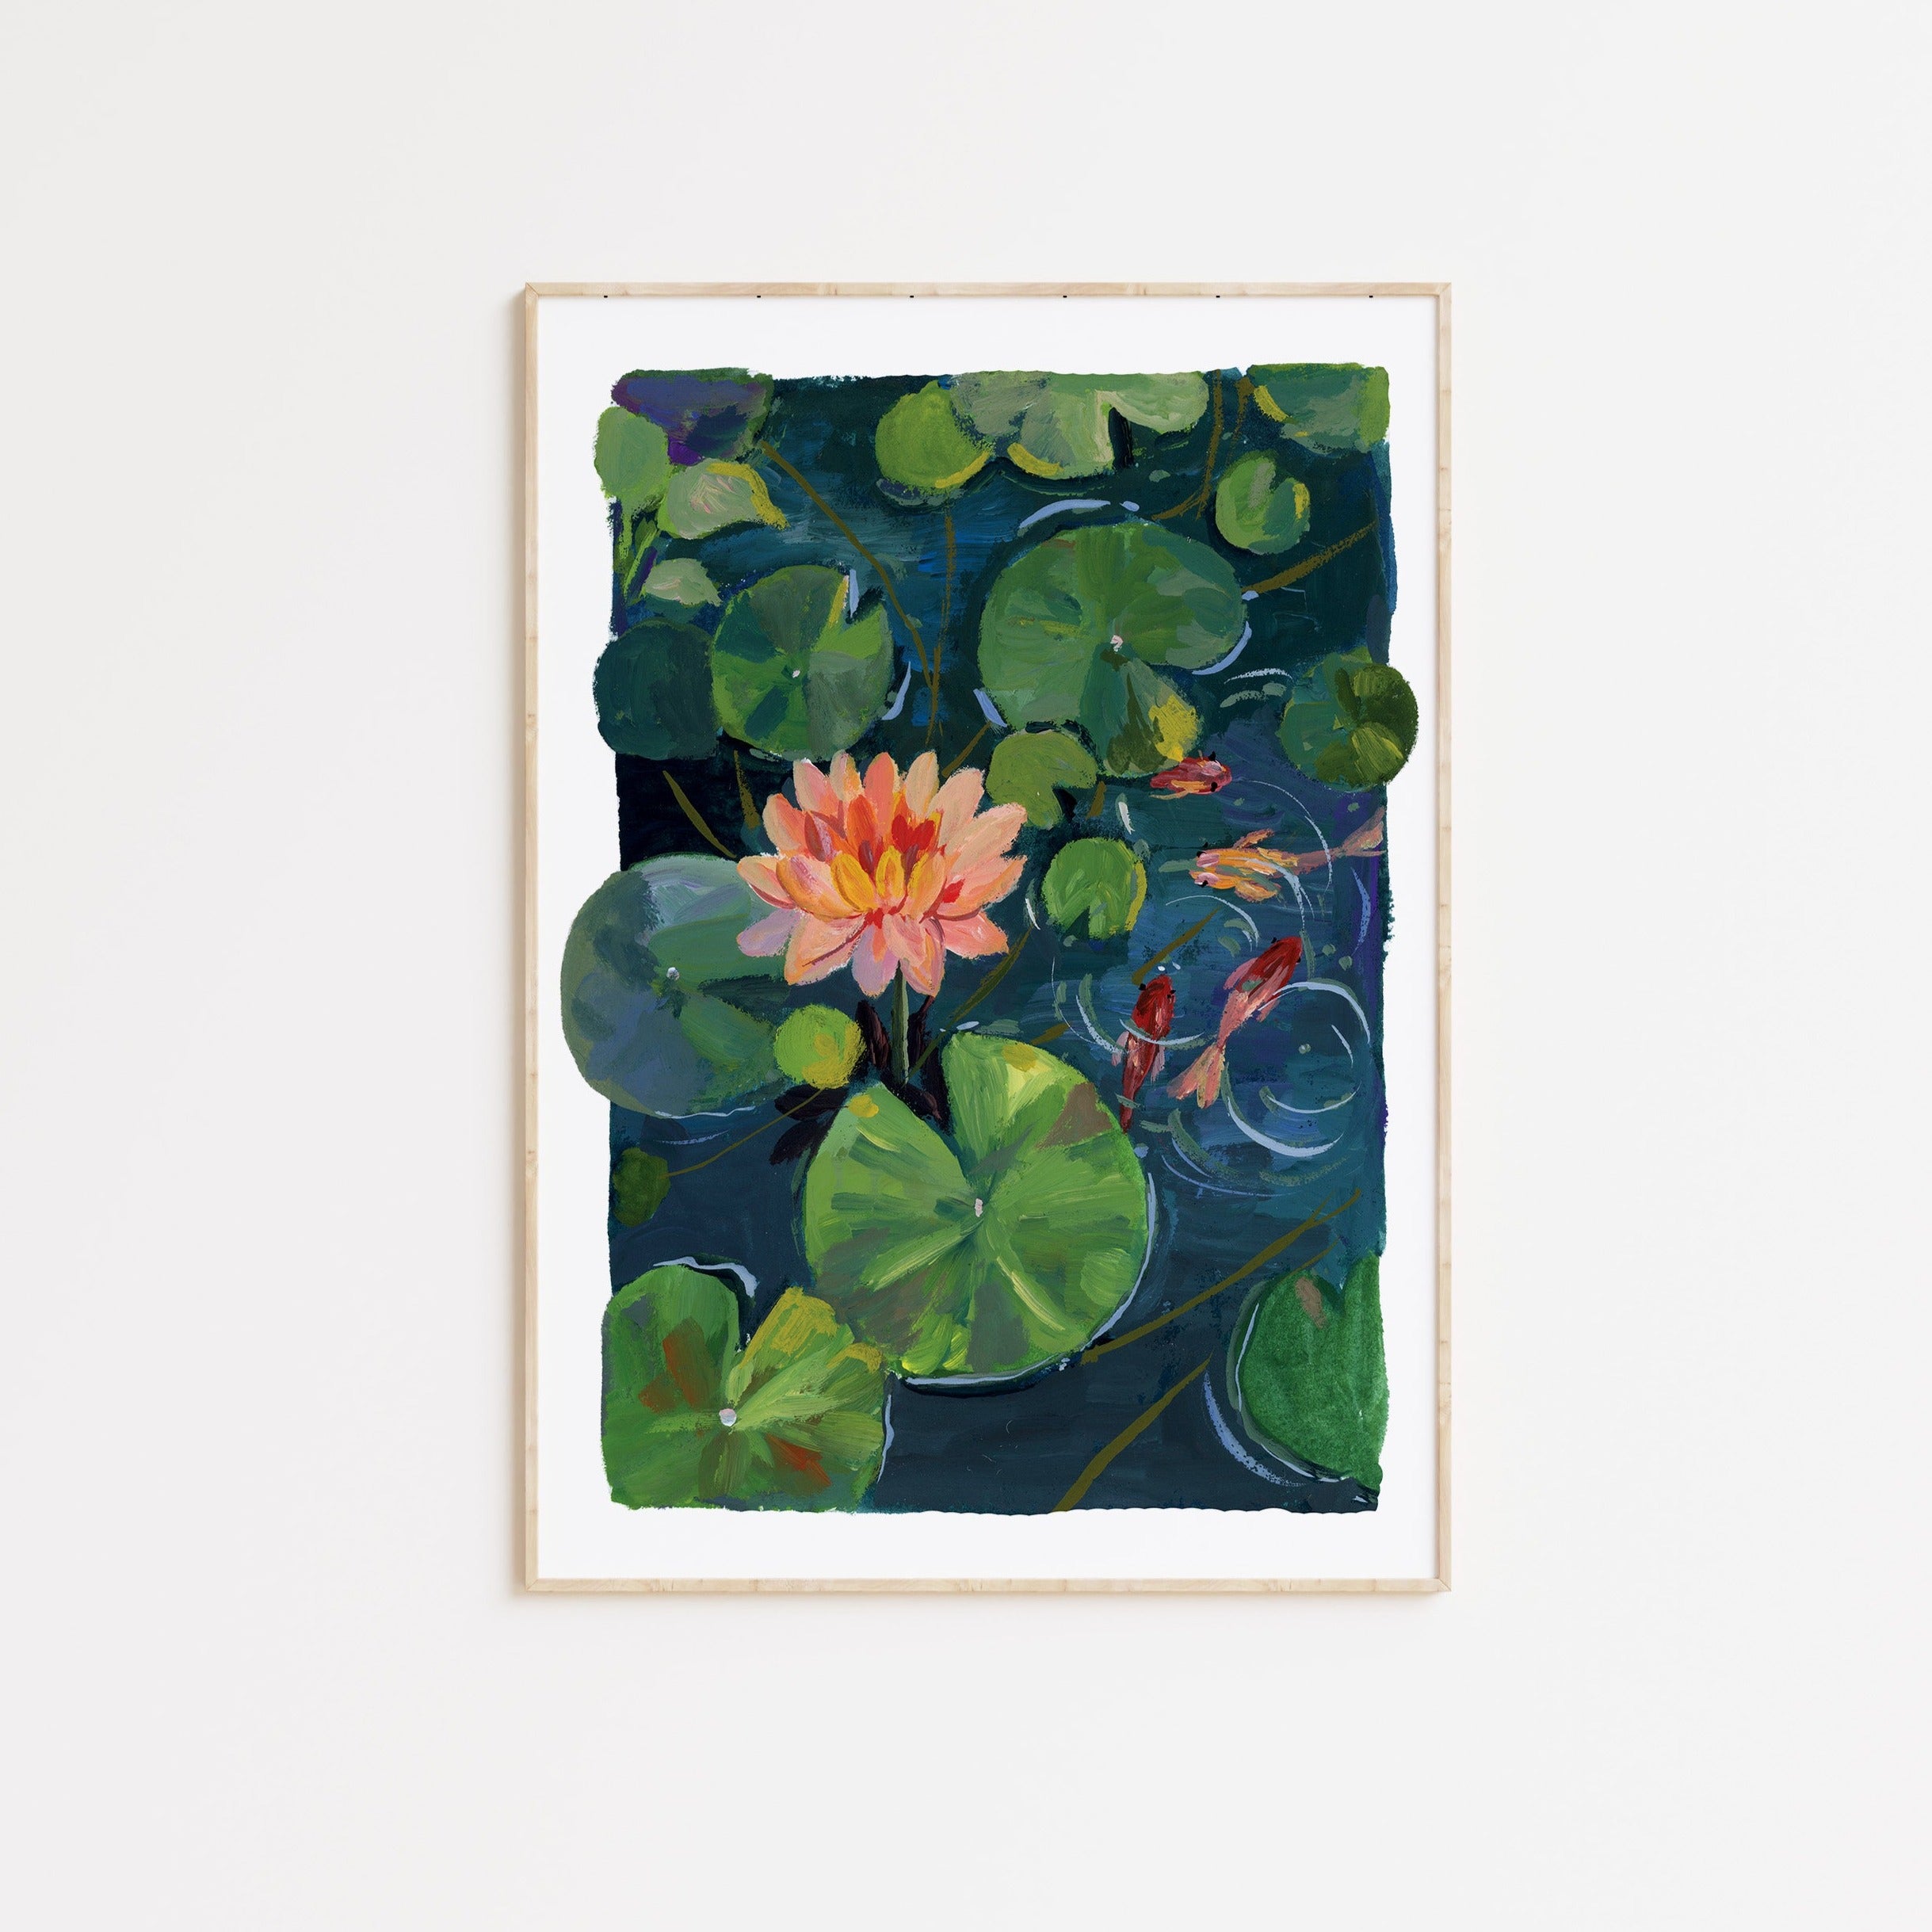 Blue Waterlily Pond On Canvas Board - Water Lilies 5x7 inches